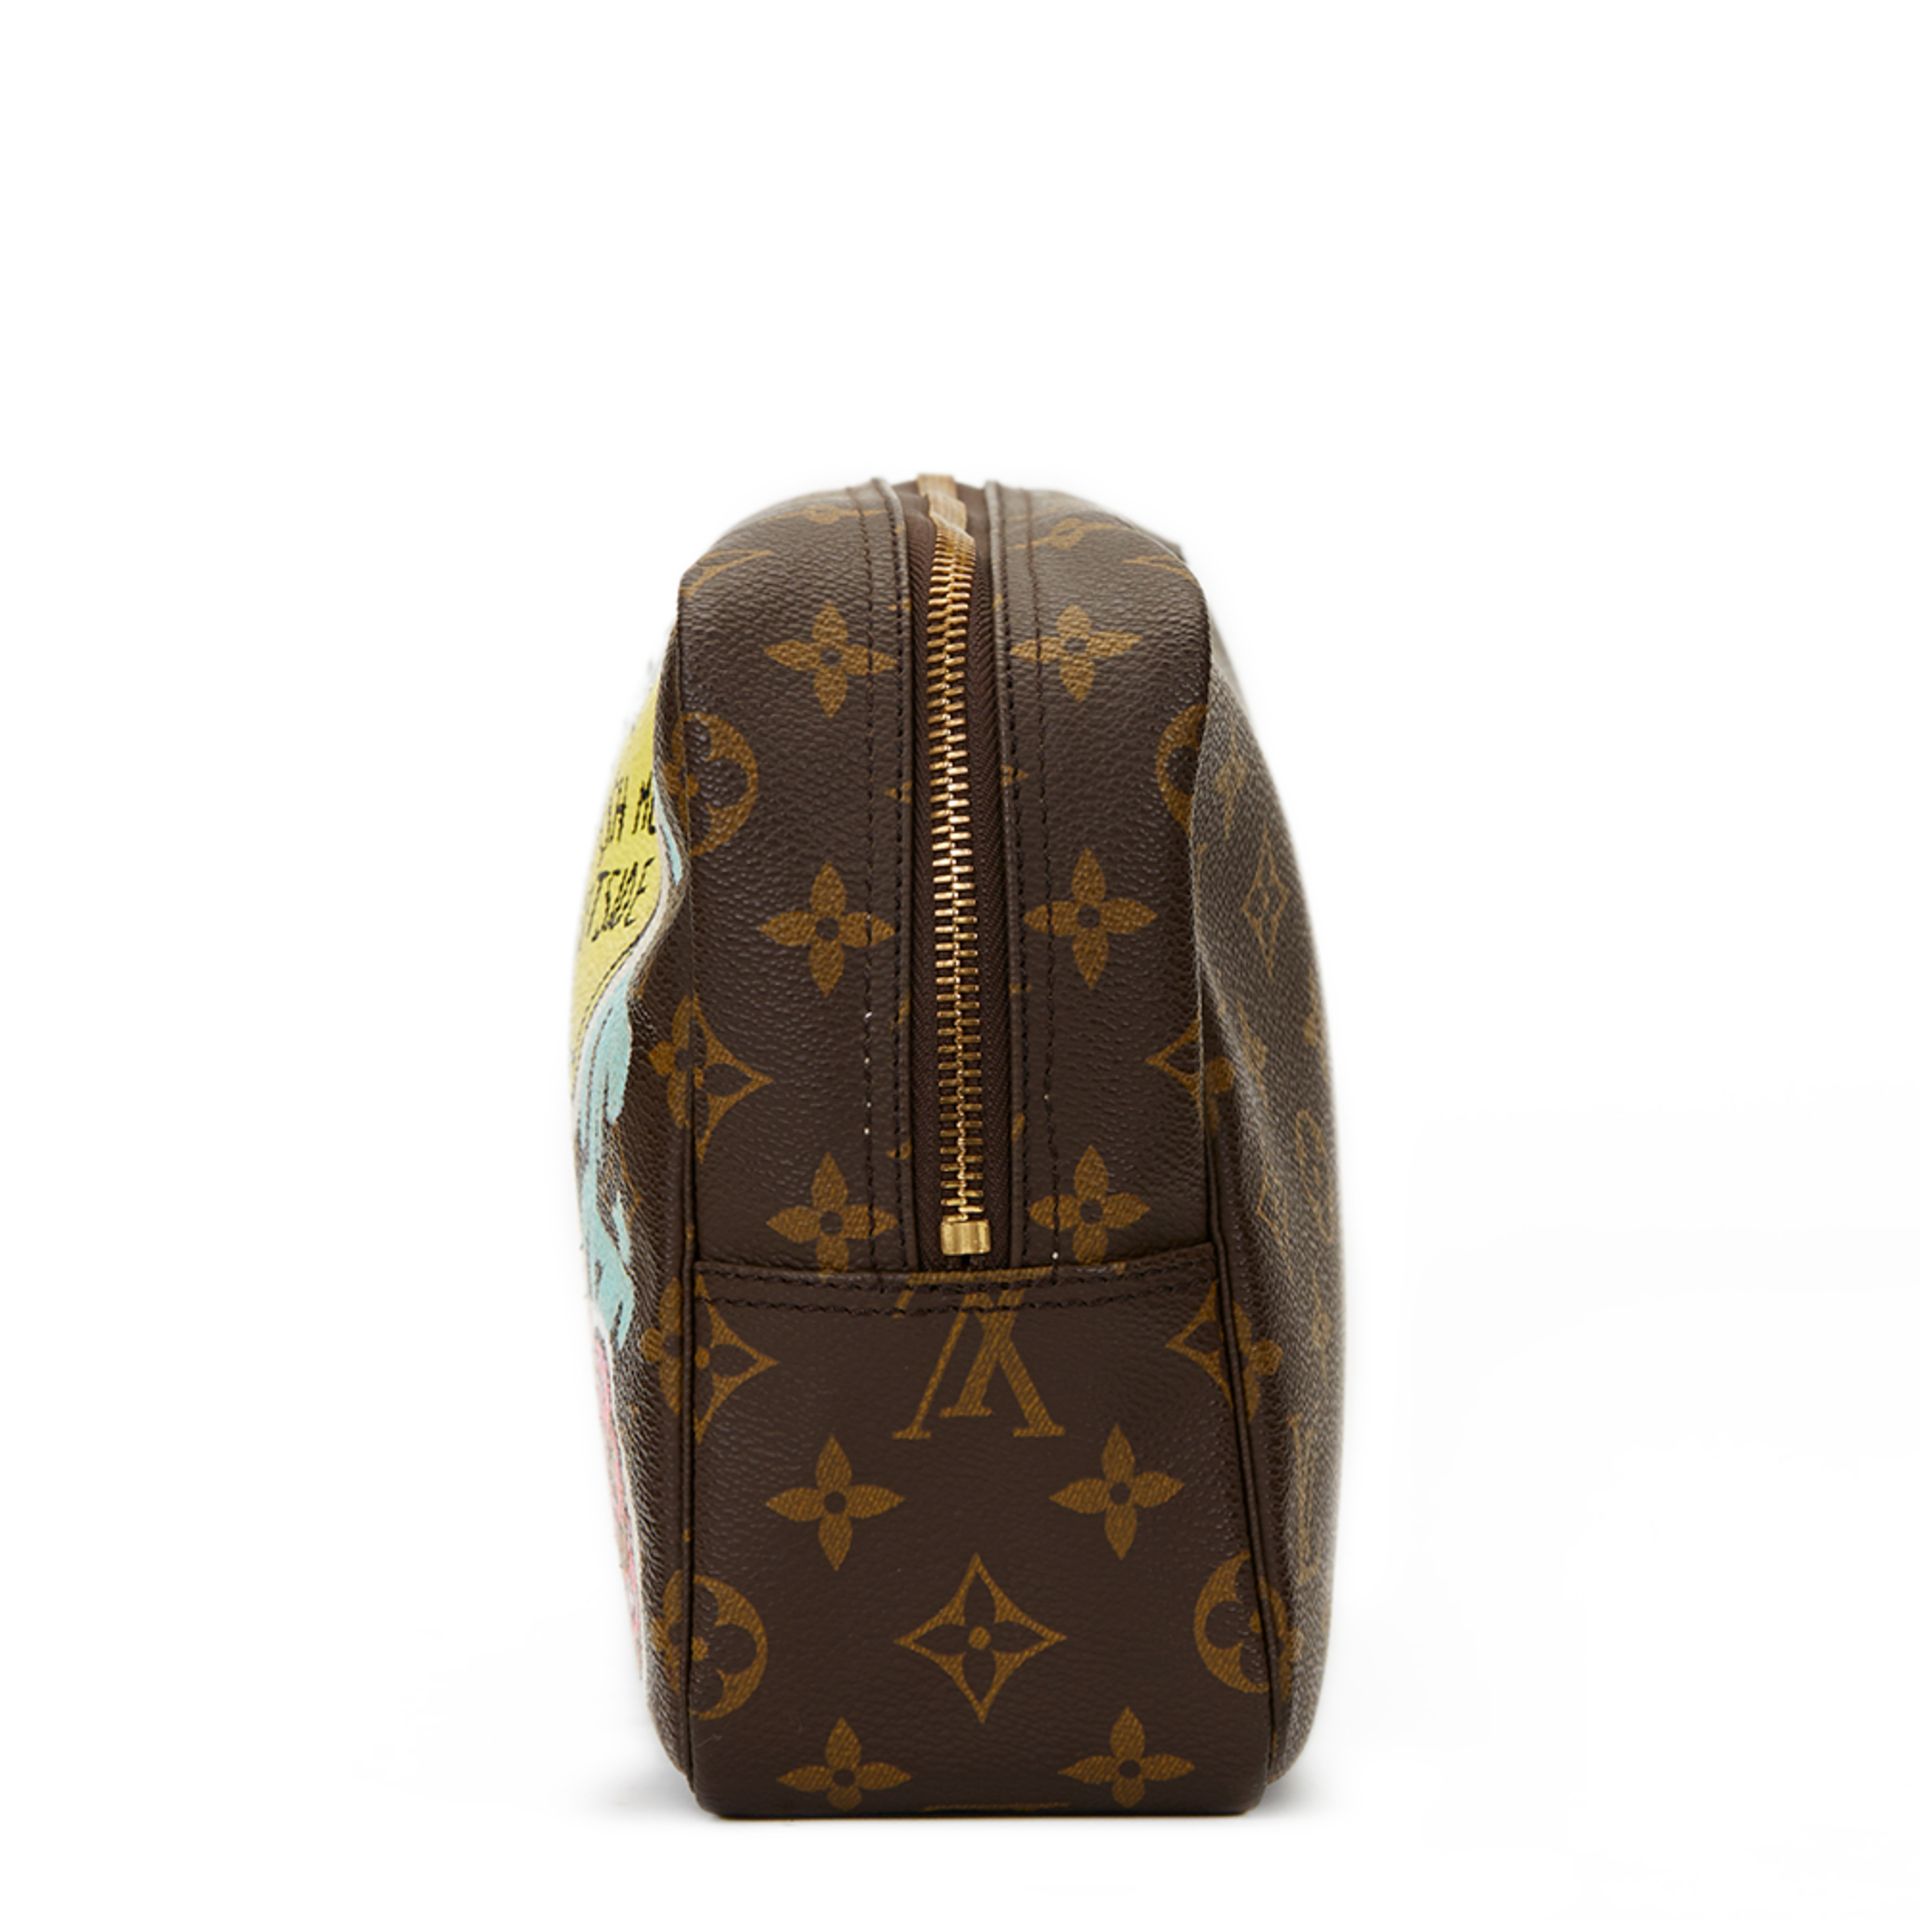 HB1180 Louis Vuitton Hand-painted 'Ca$h Me Outside' X Year Zero London Toiletry Pouch - Image 3 of 9